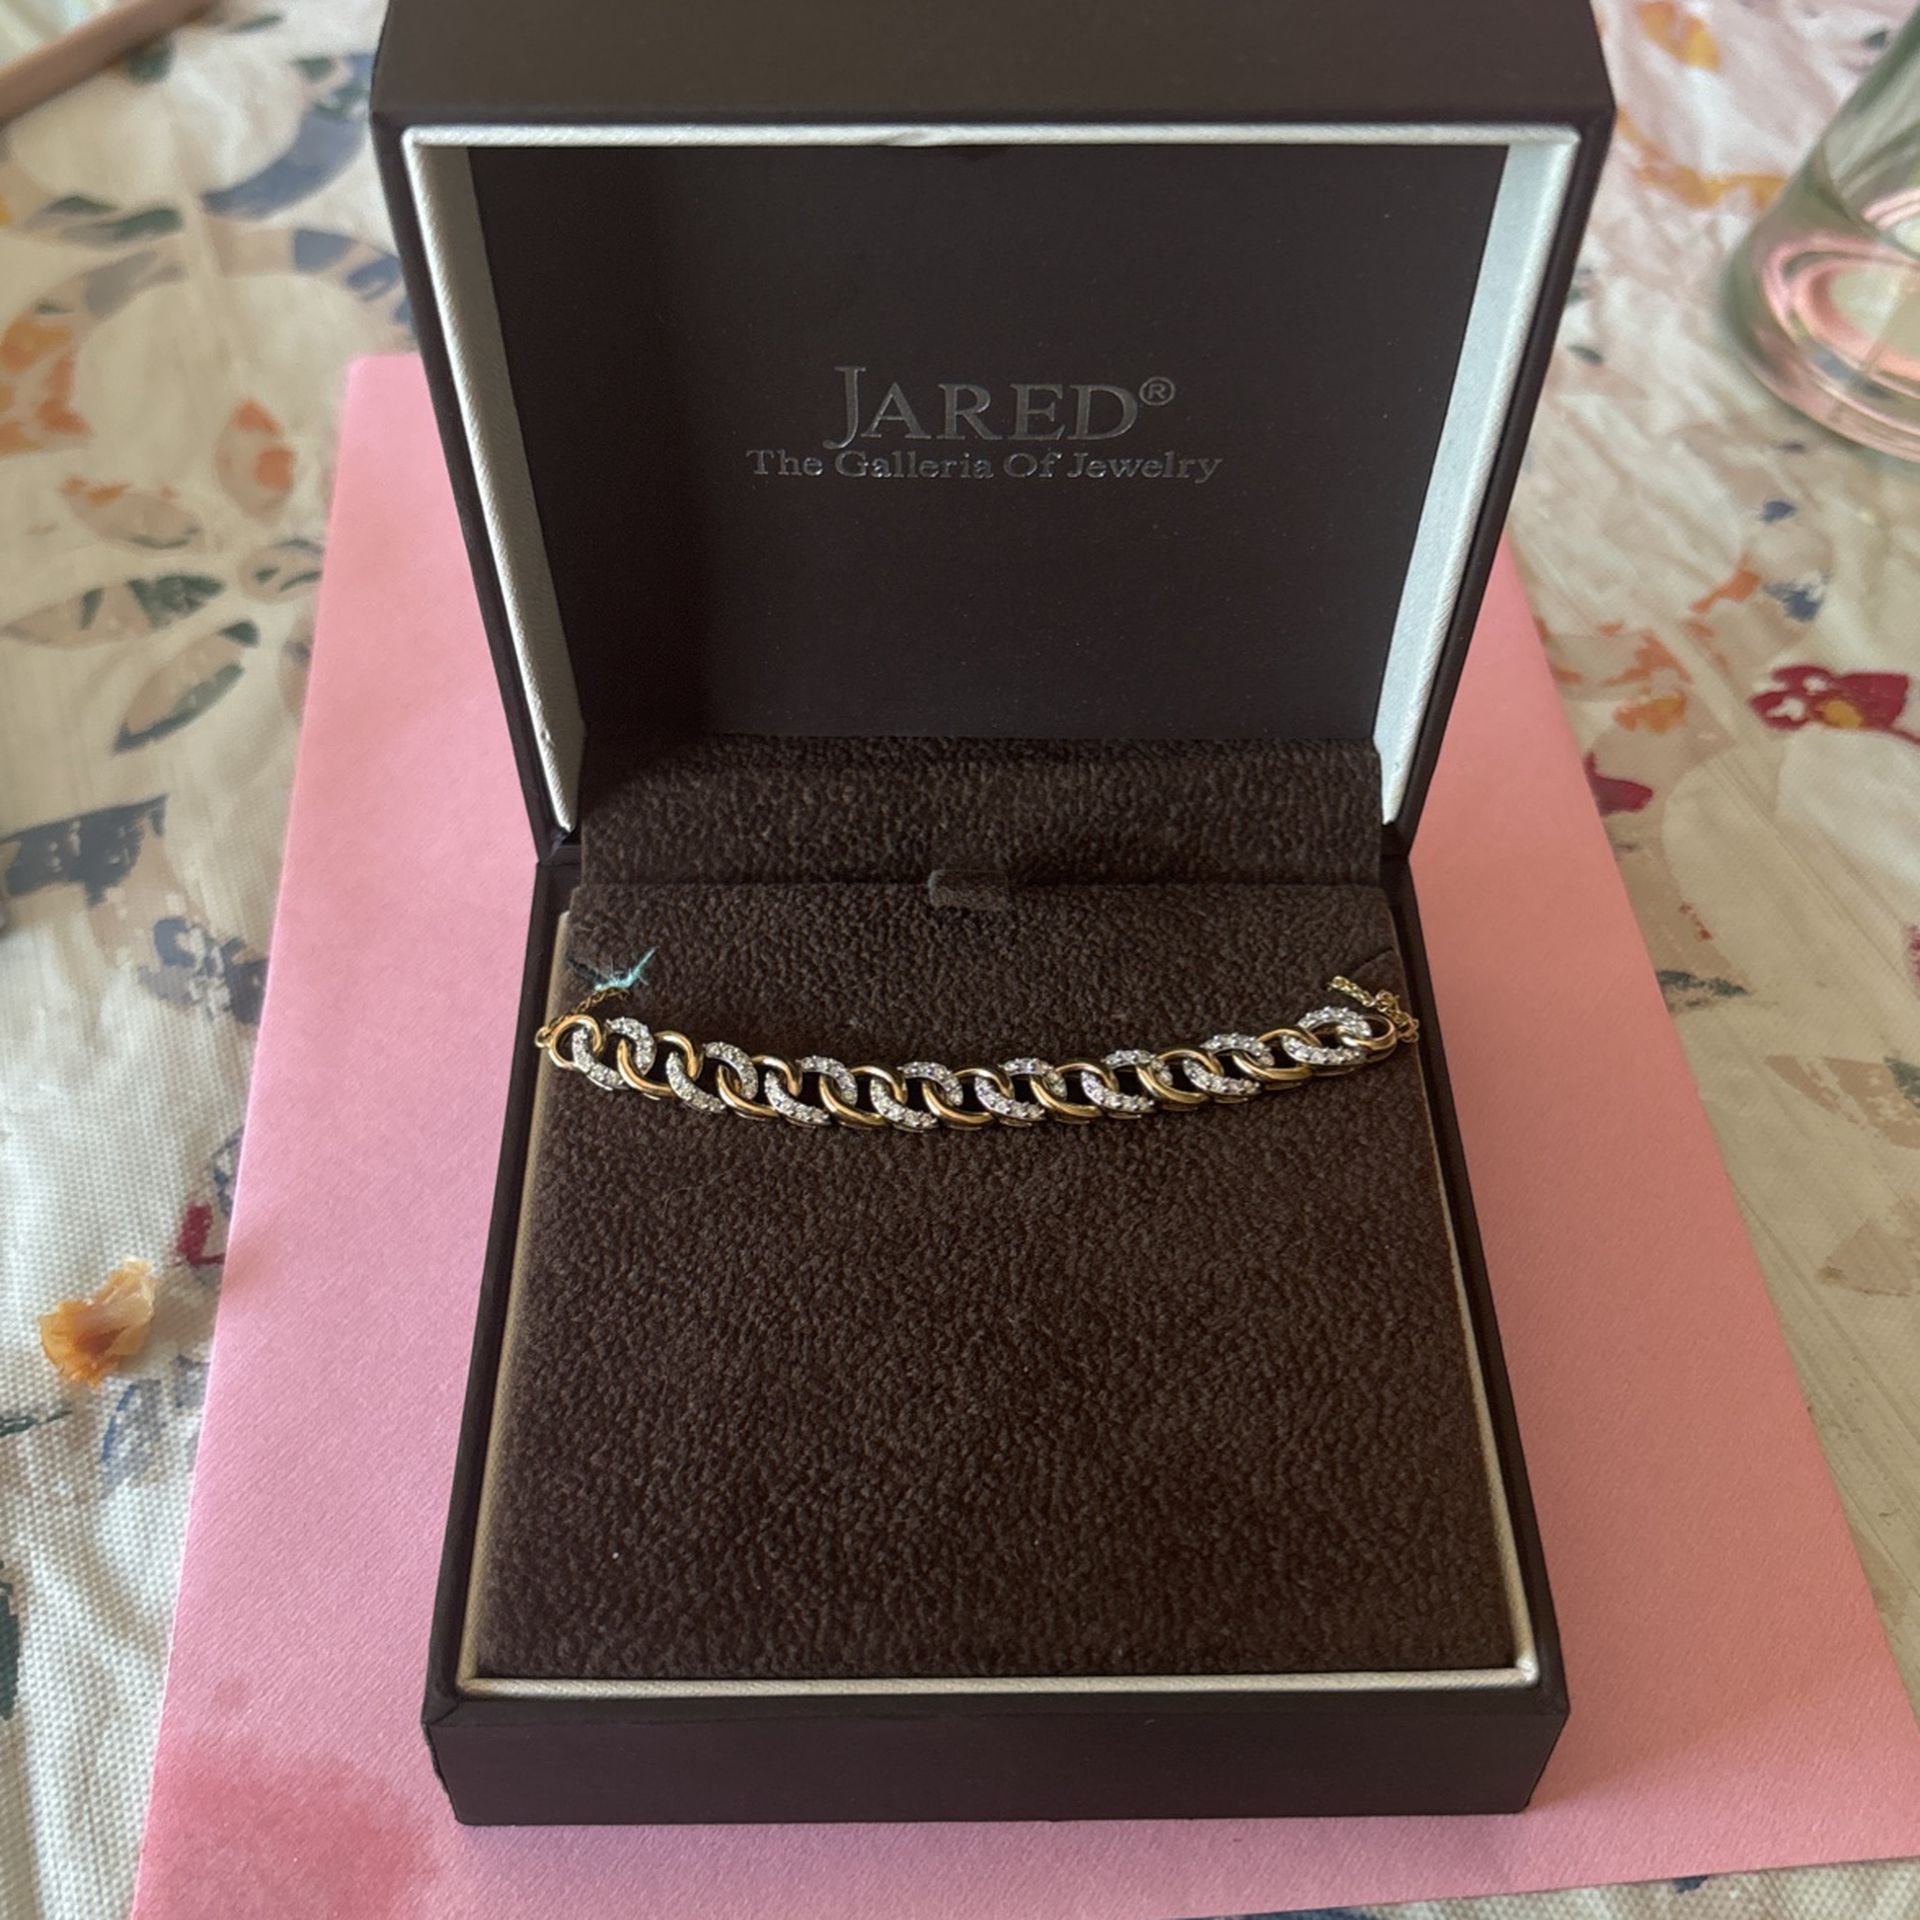 Jared The Galleria Of Jewelry Online Shippable